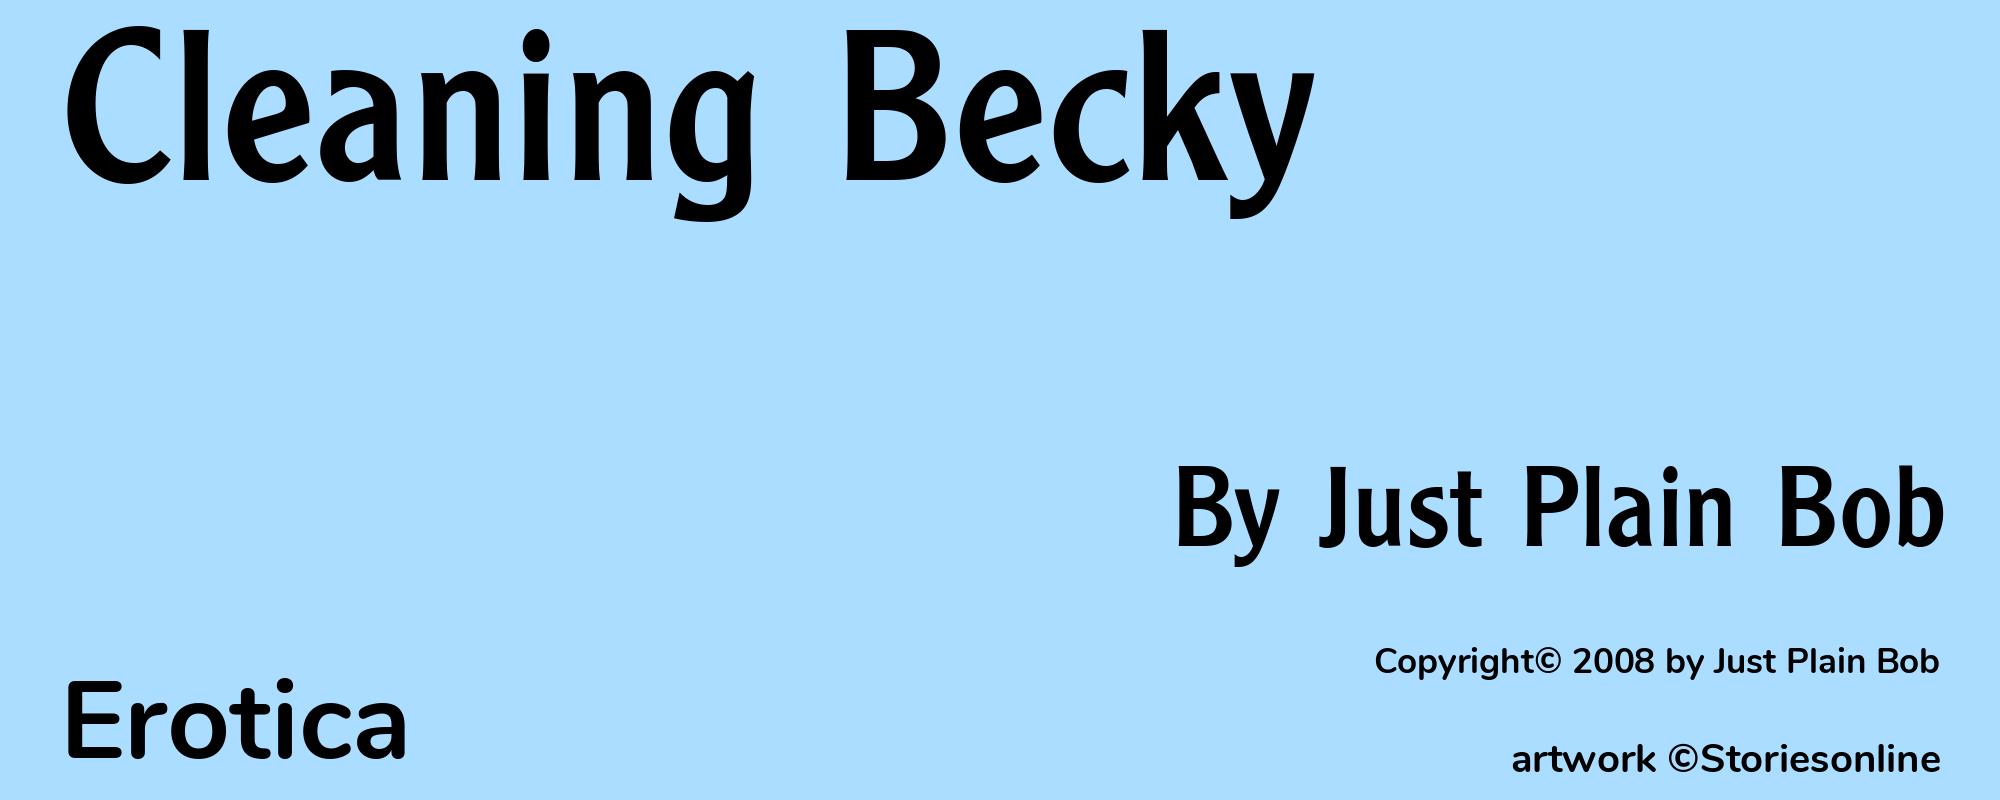 Cleaning Becky - Cover